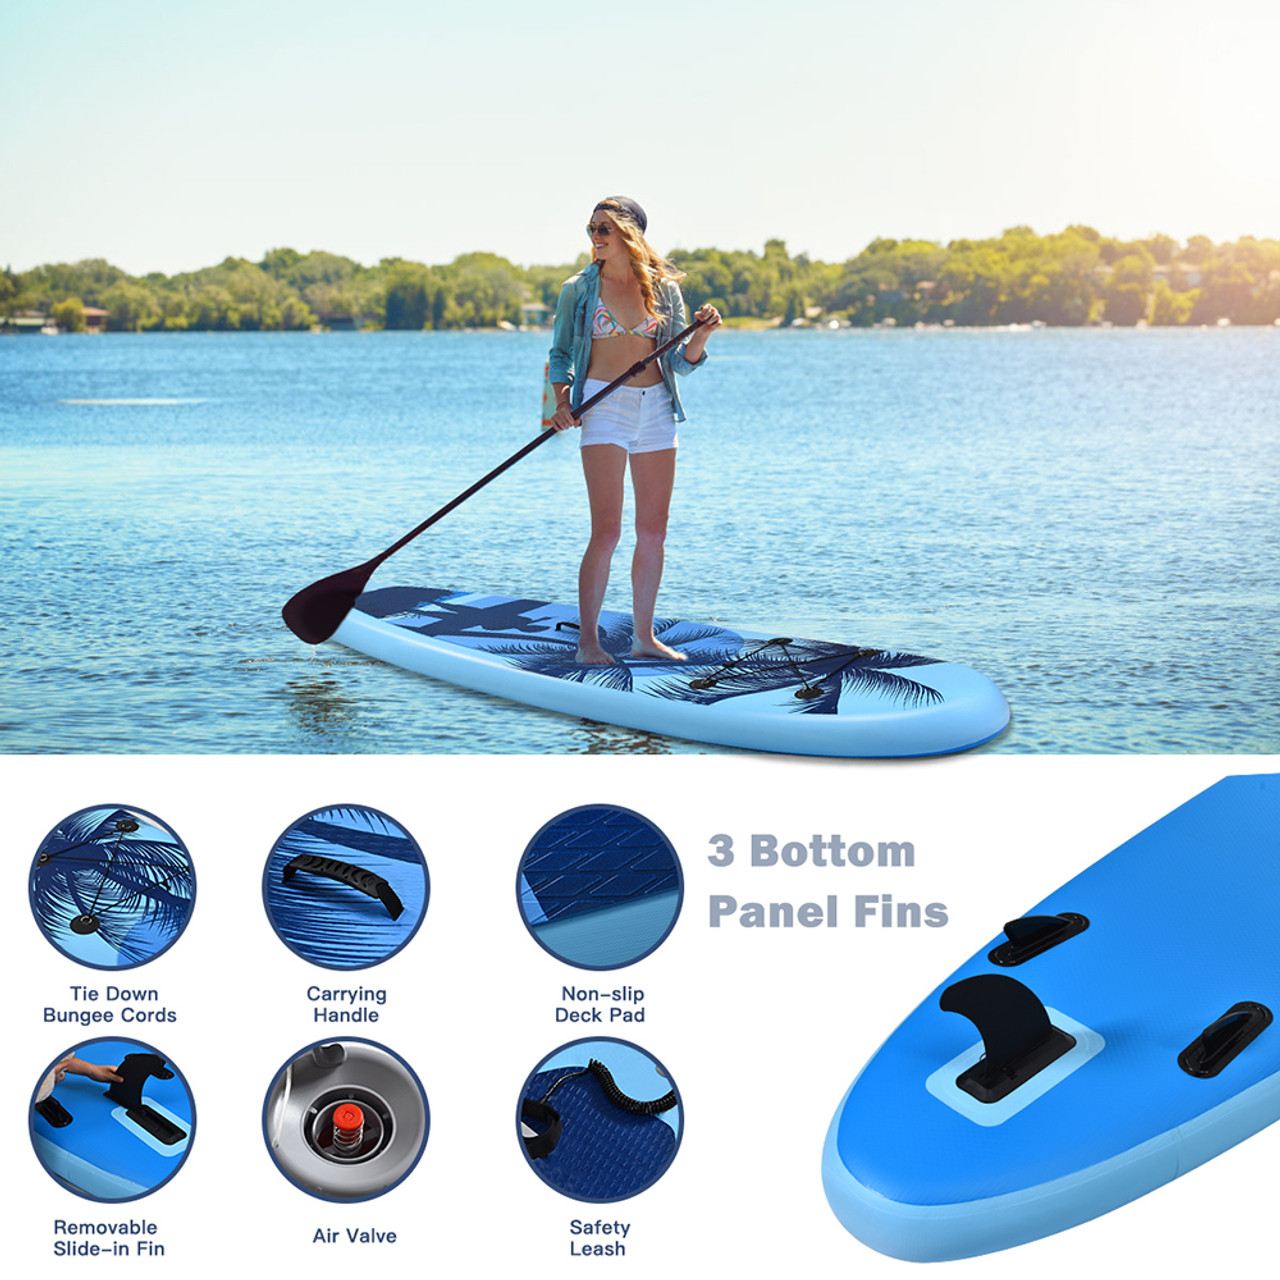 9.8 to 11-Foot Blue Beach Surfer Inflatable Stand-up Paddle Board product image